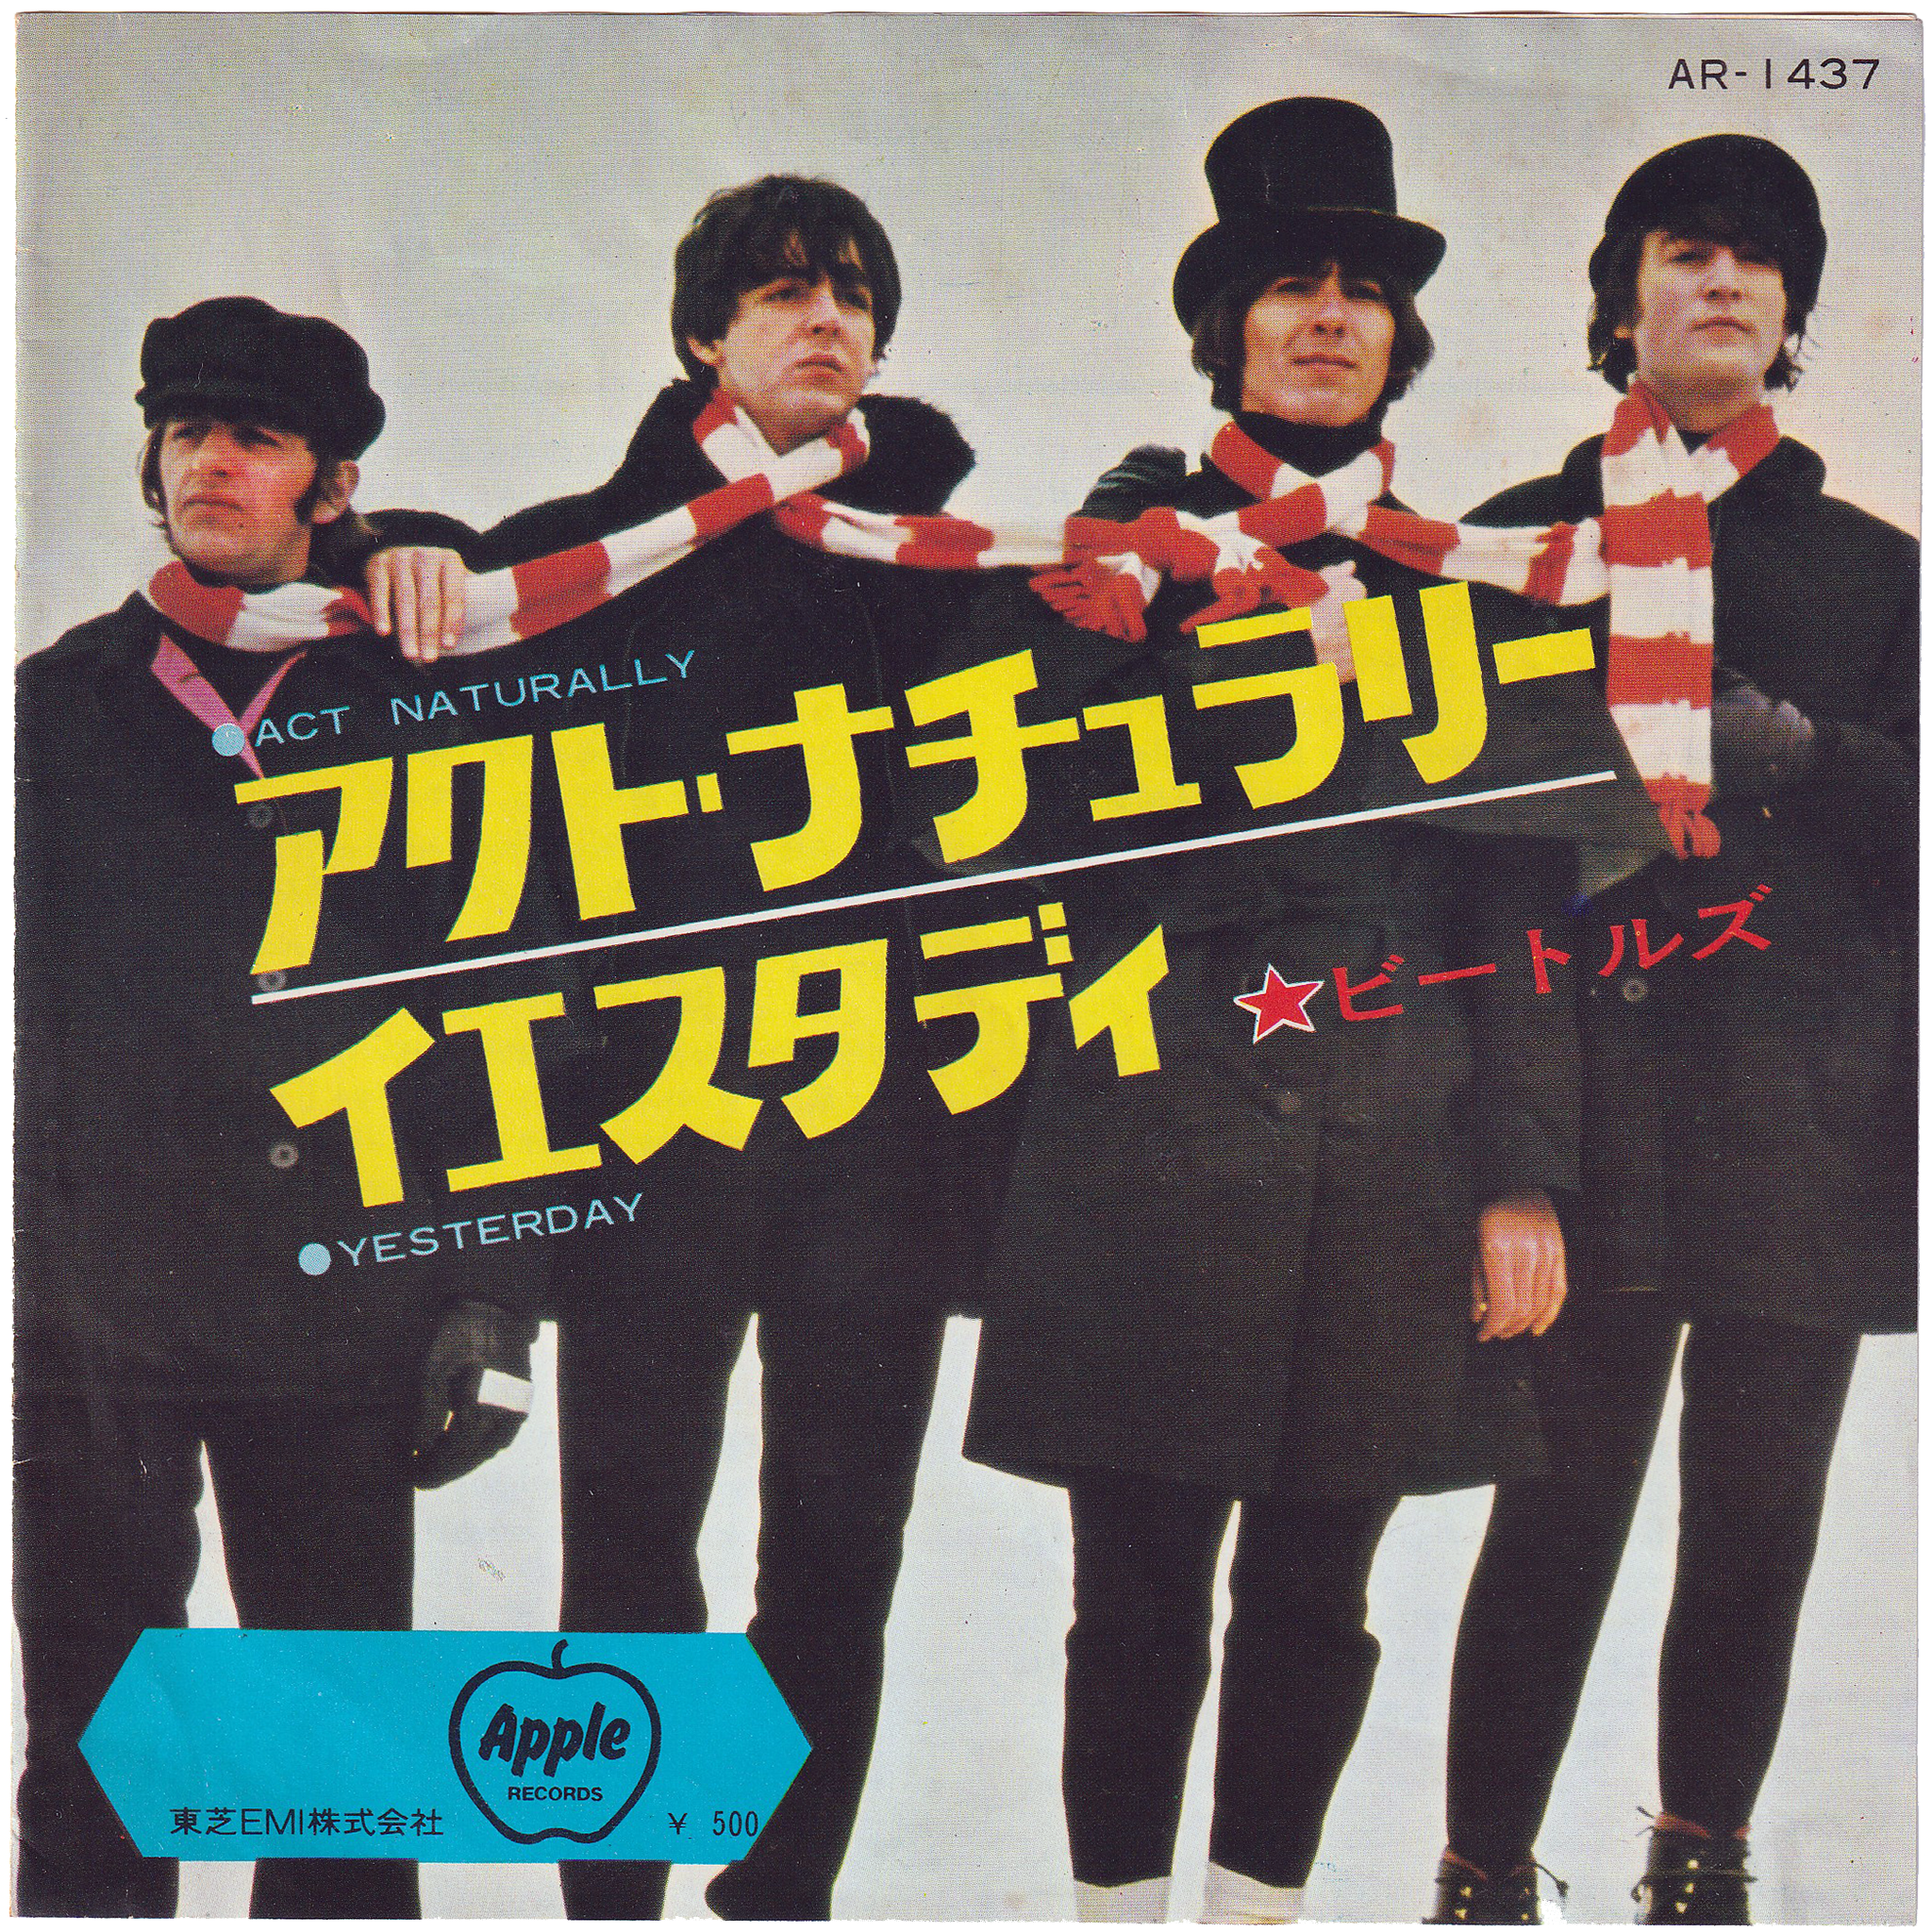 Yesterday　Beatles　Re-Issue,　Naturally　[Japan　NIGHT　w/PS]　RECORDS　–　BEAT　The　Act